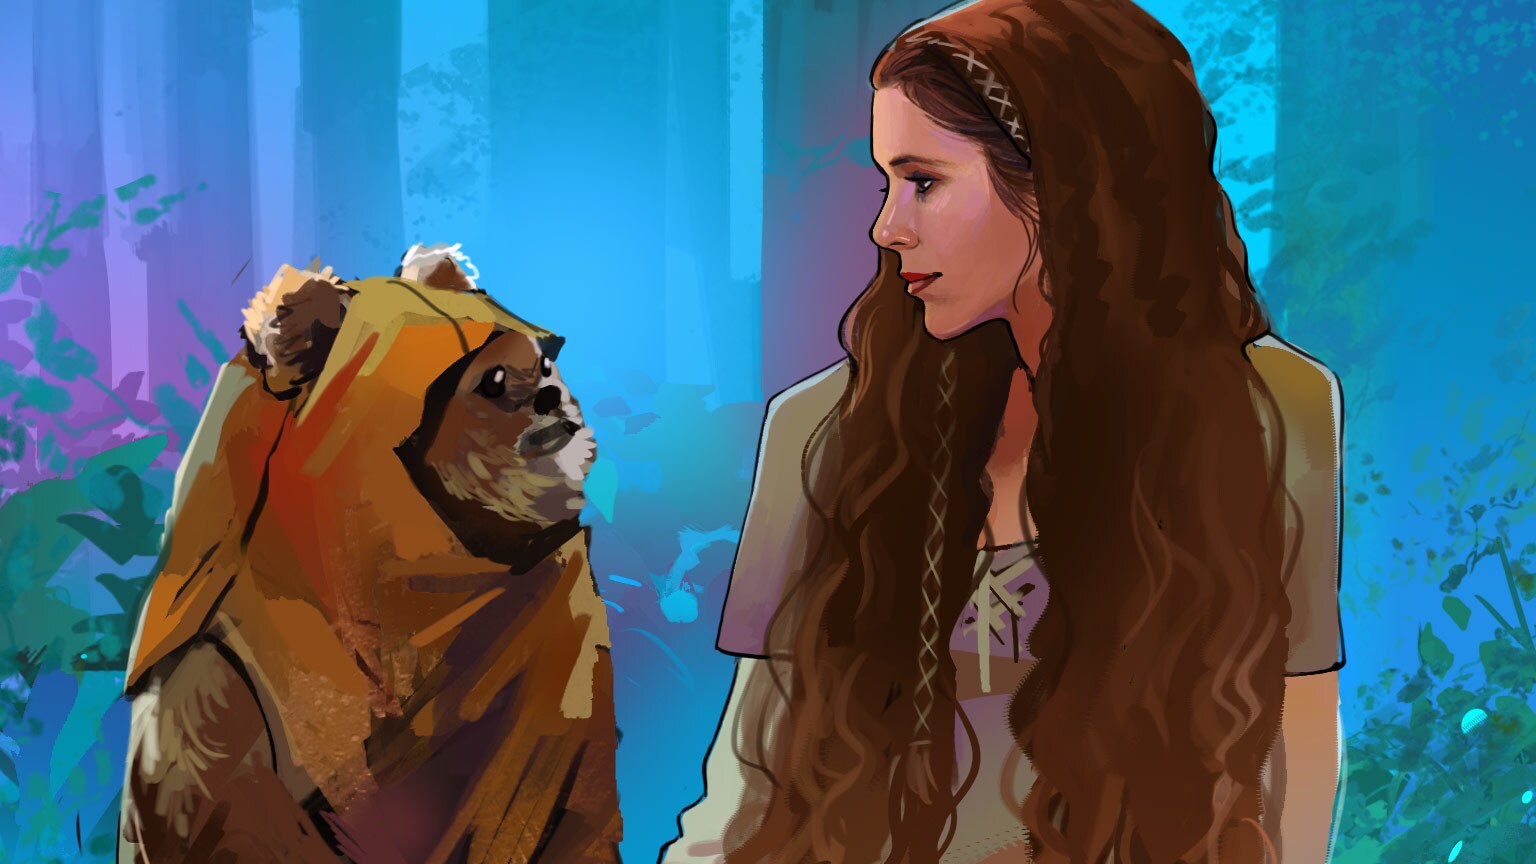 Check Out 5 Incredible Illustrations from Star Wars: Women of the Galaxy - Exclusive